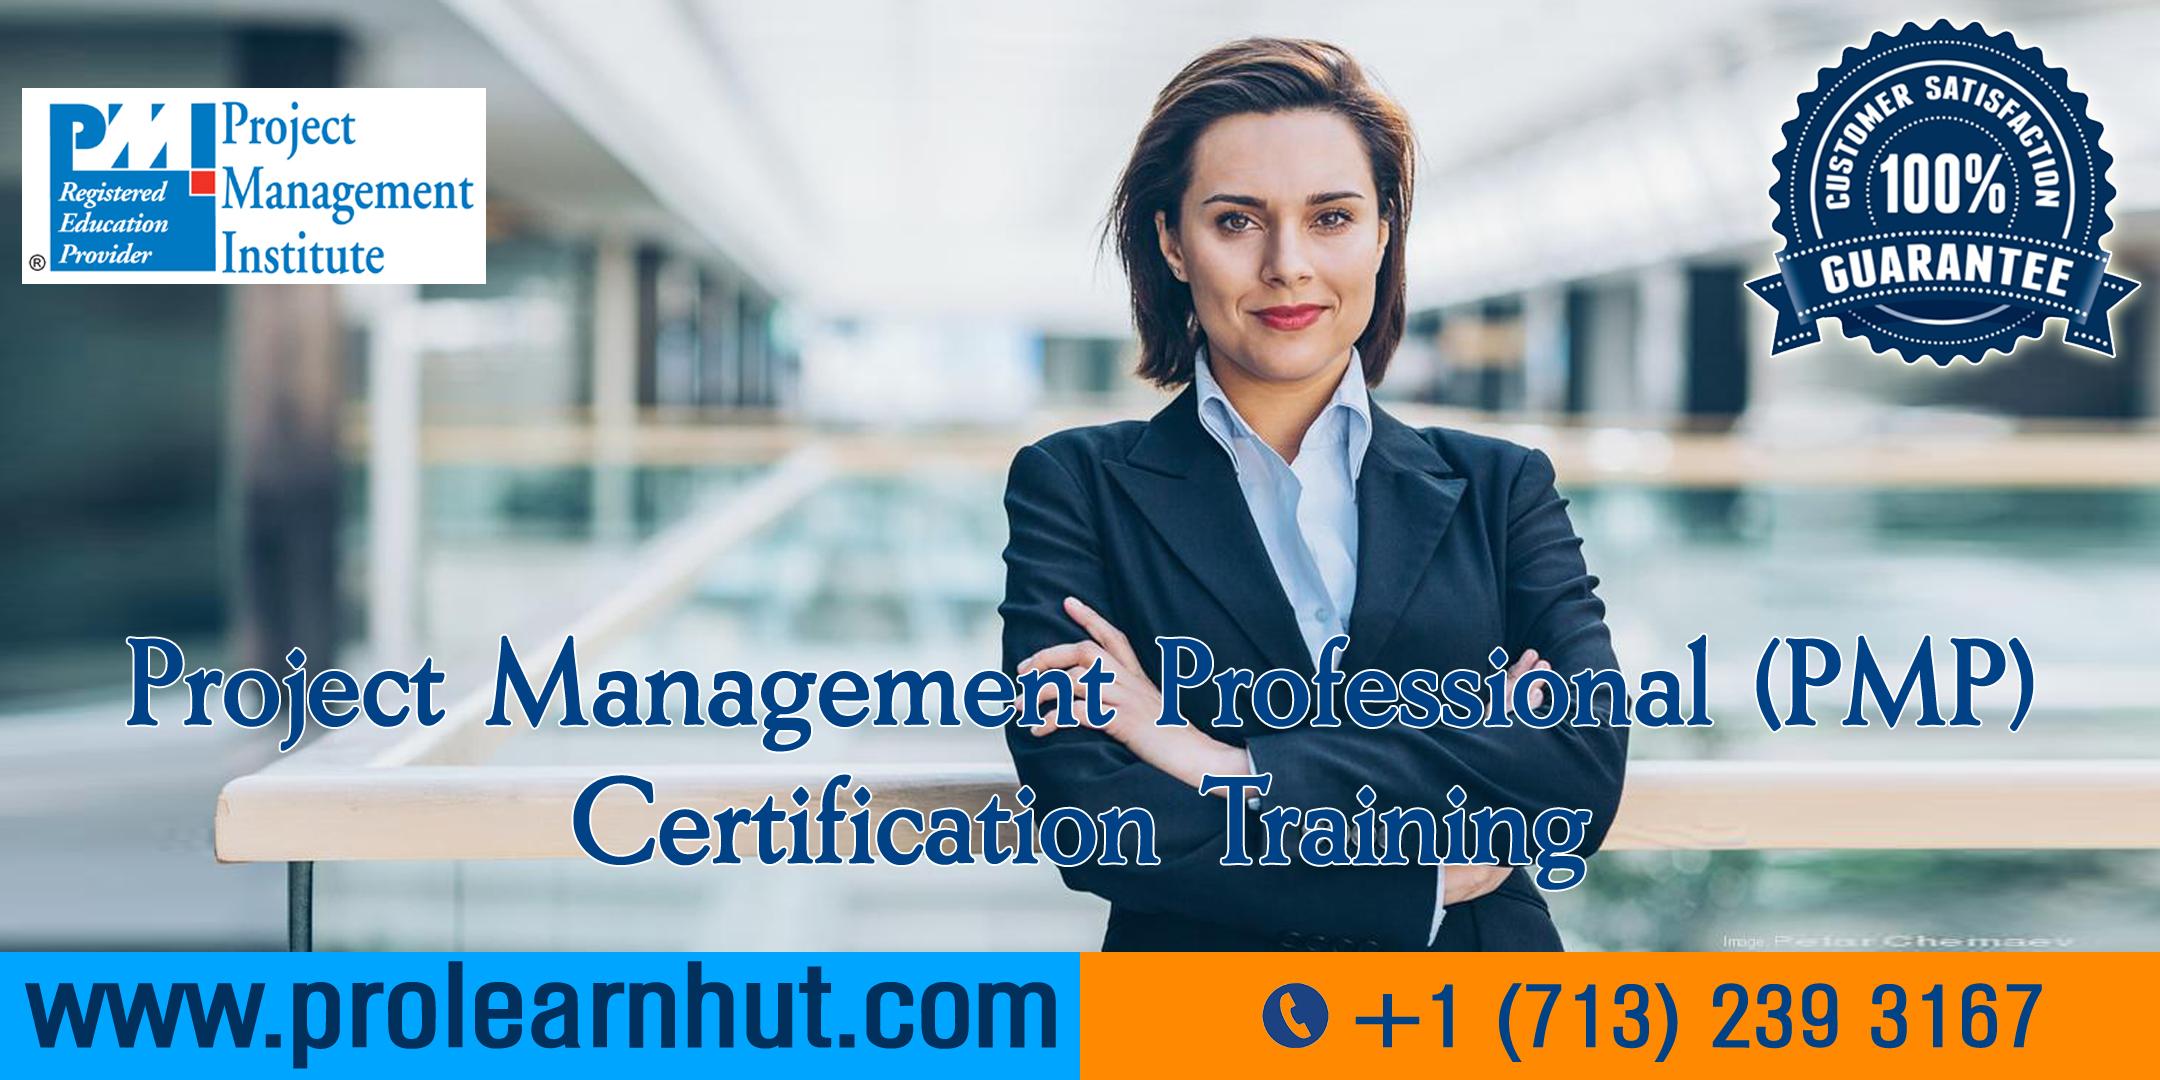 PMP Certification | Project Management Certification| PMP Training in San Mateo, CA | ProLearnHut